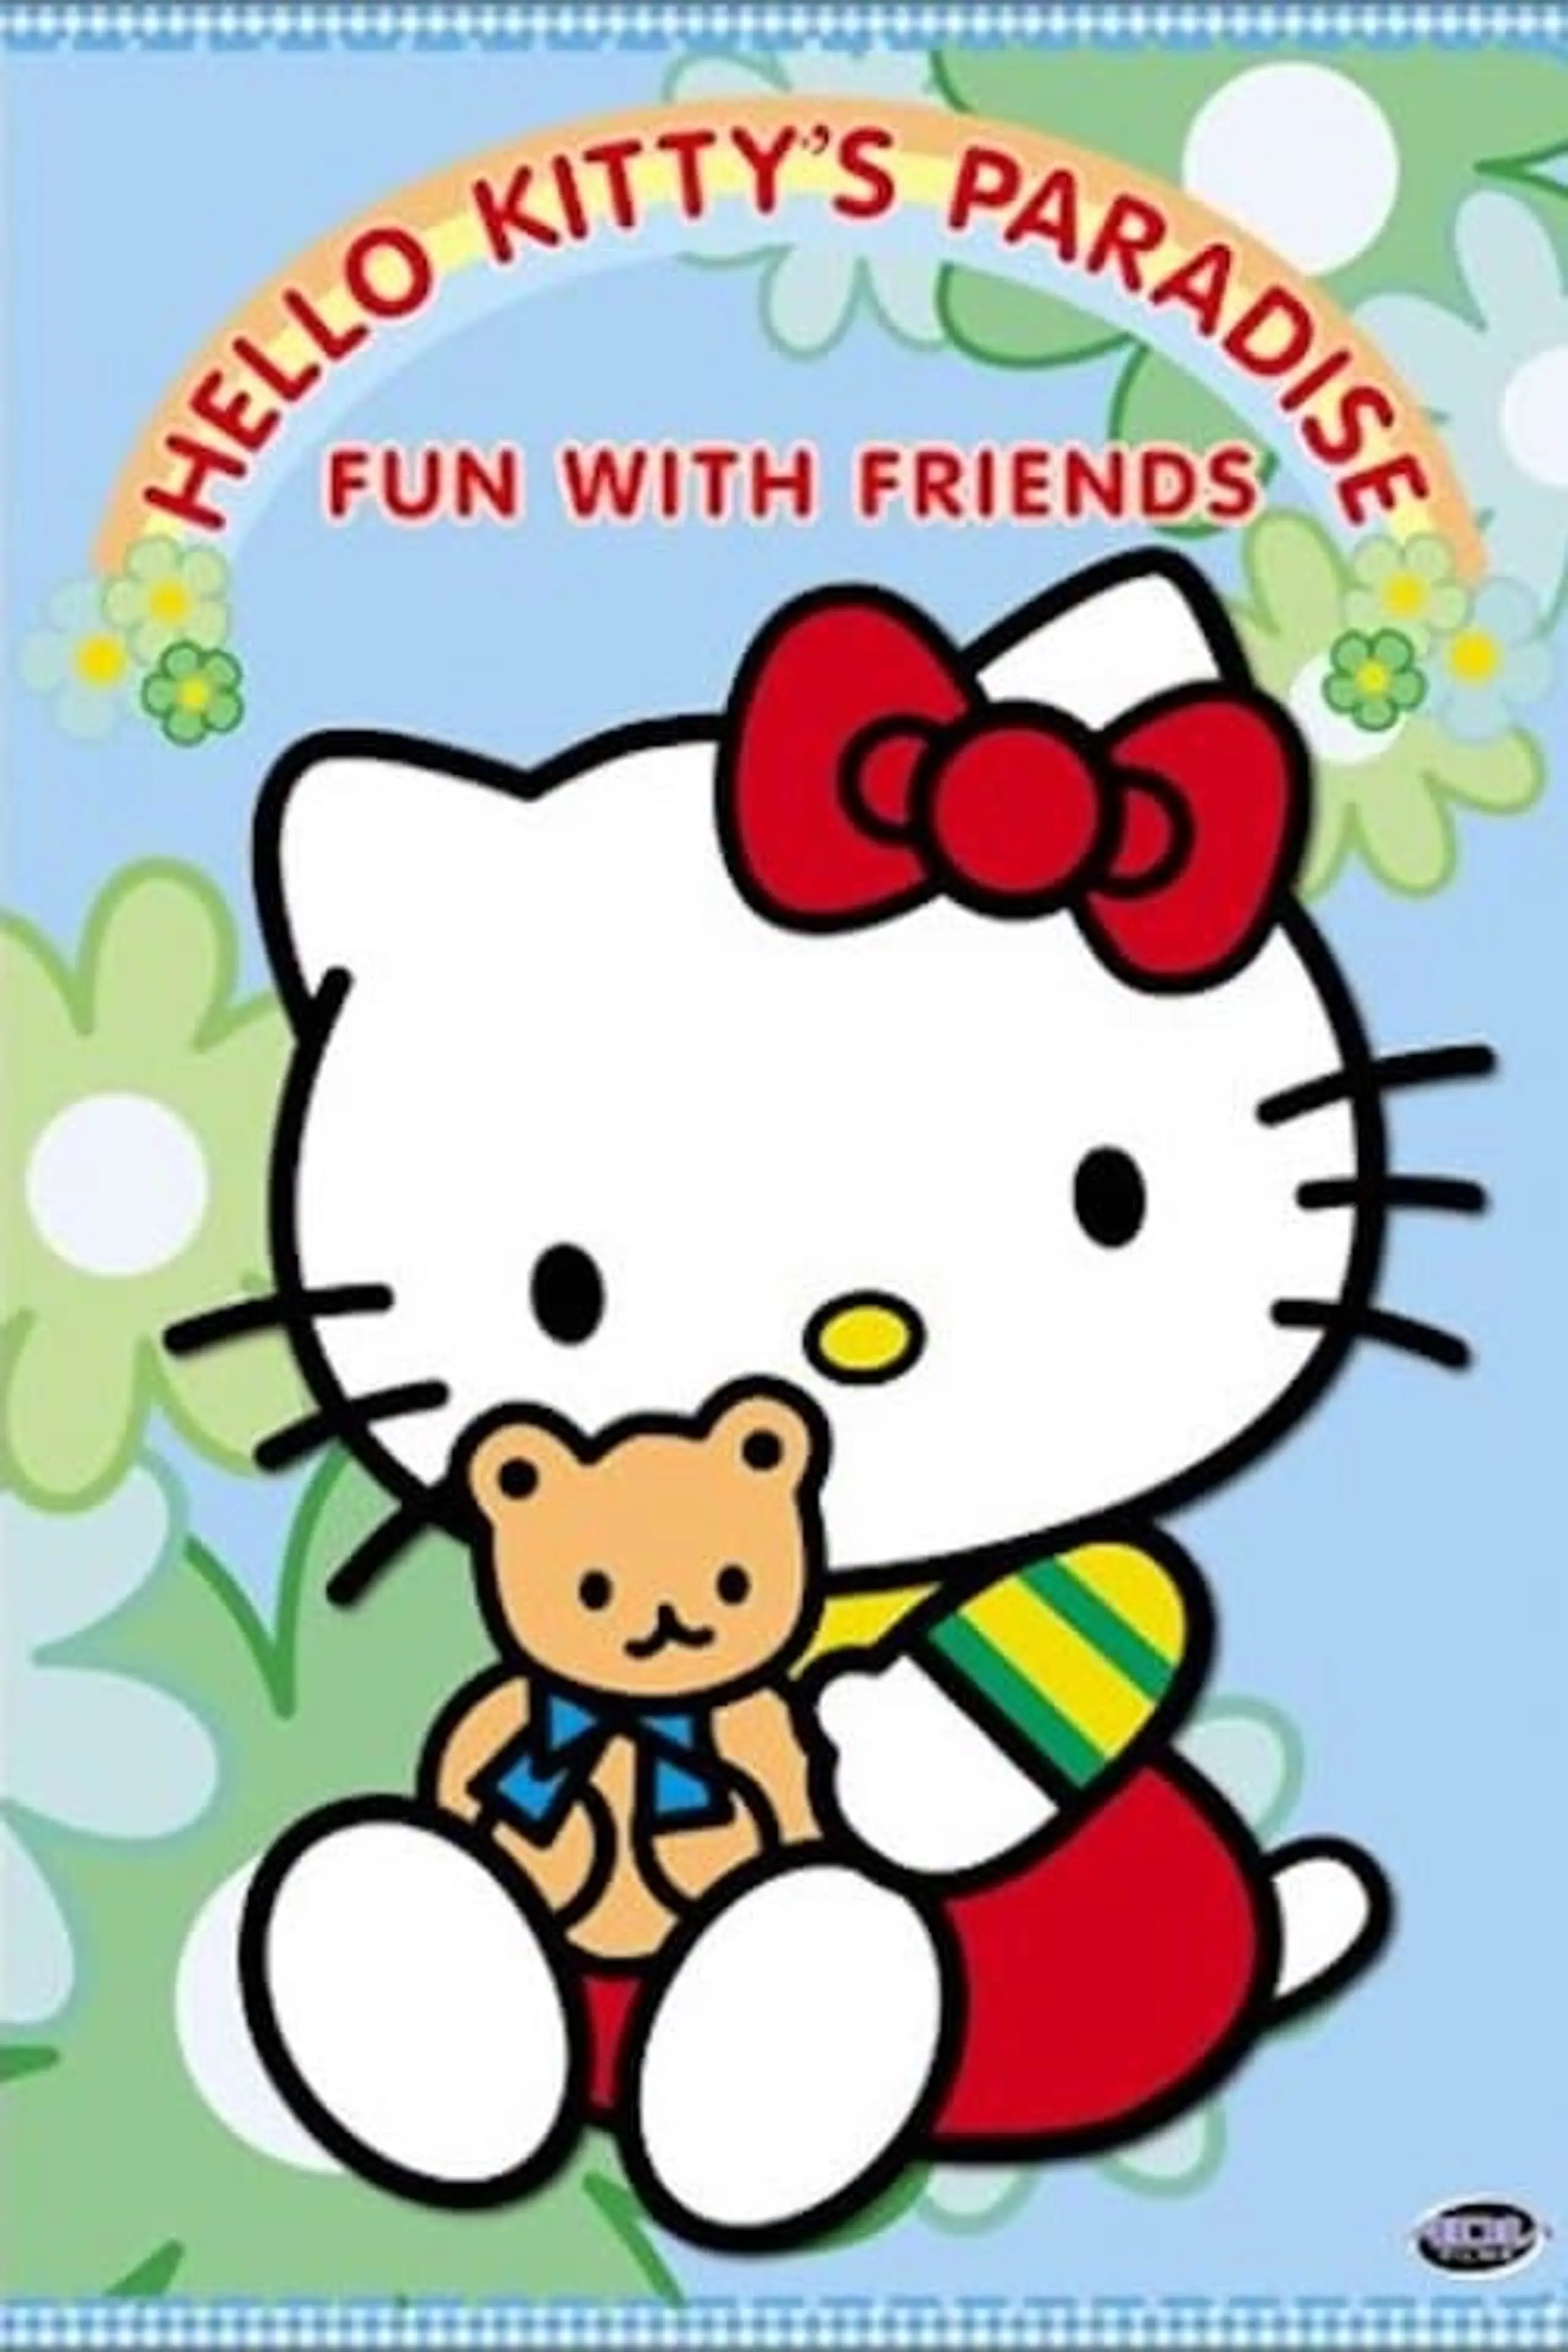 Hello Kittys Paradise - Fun With Friends